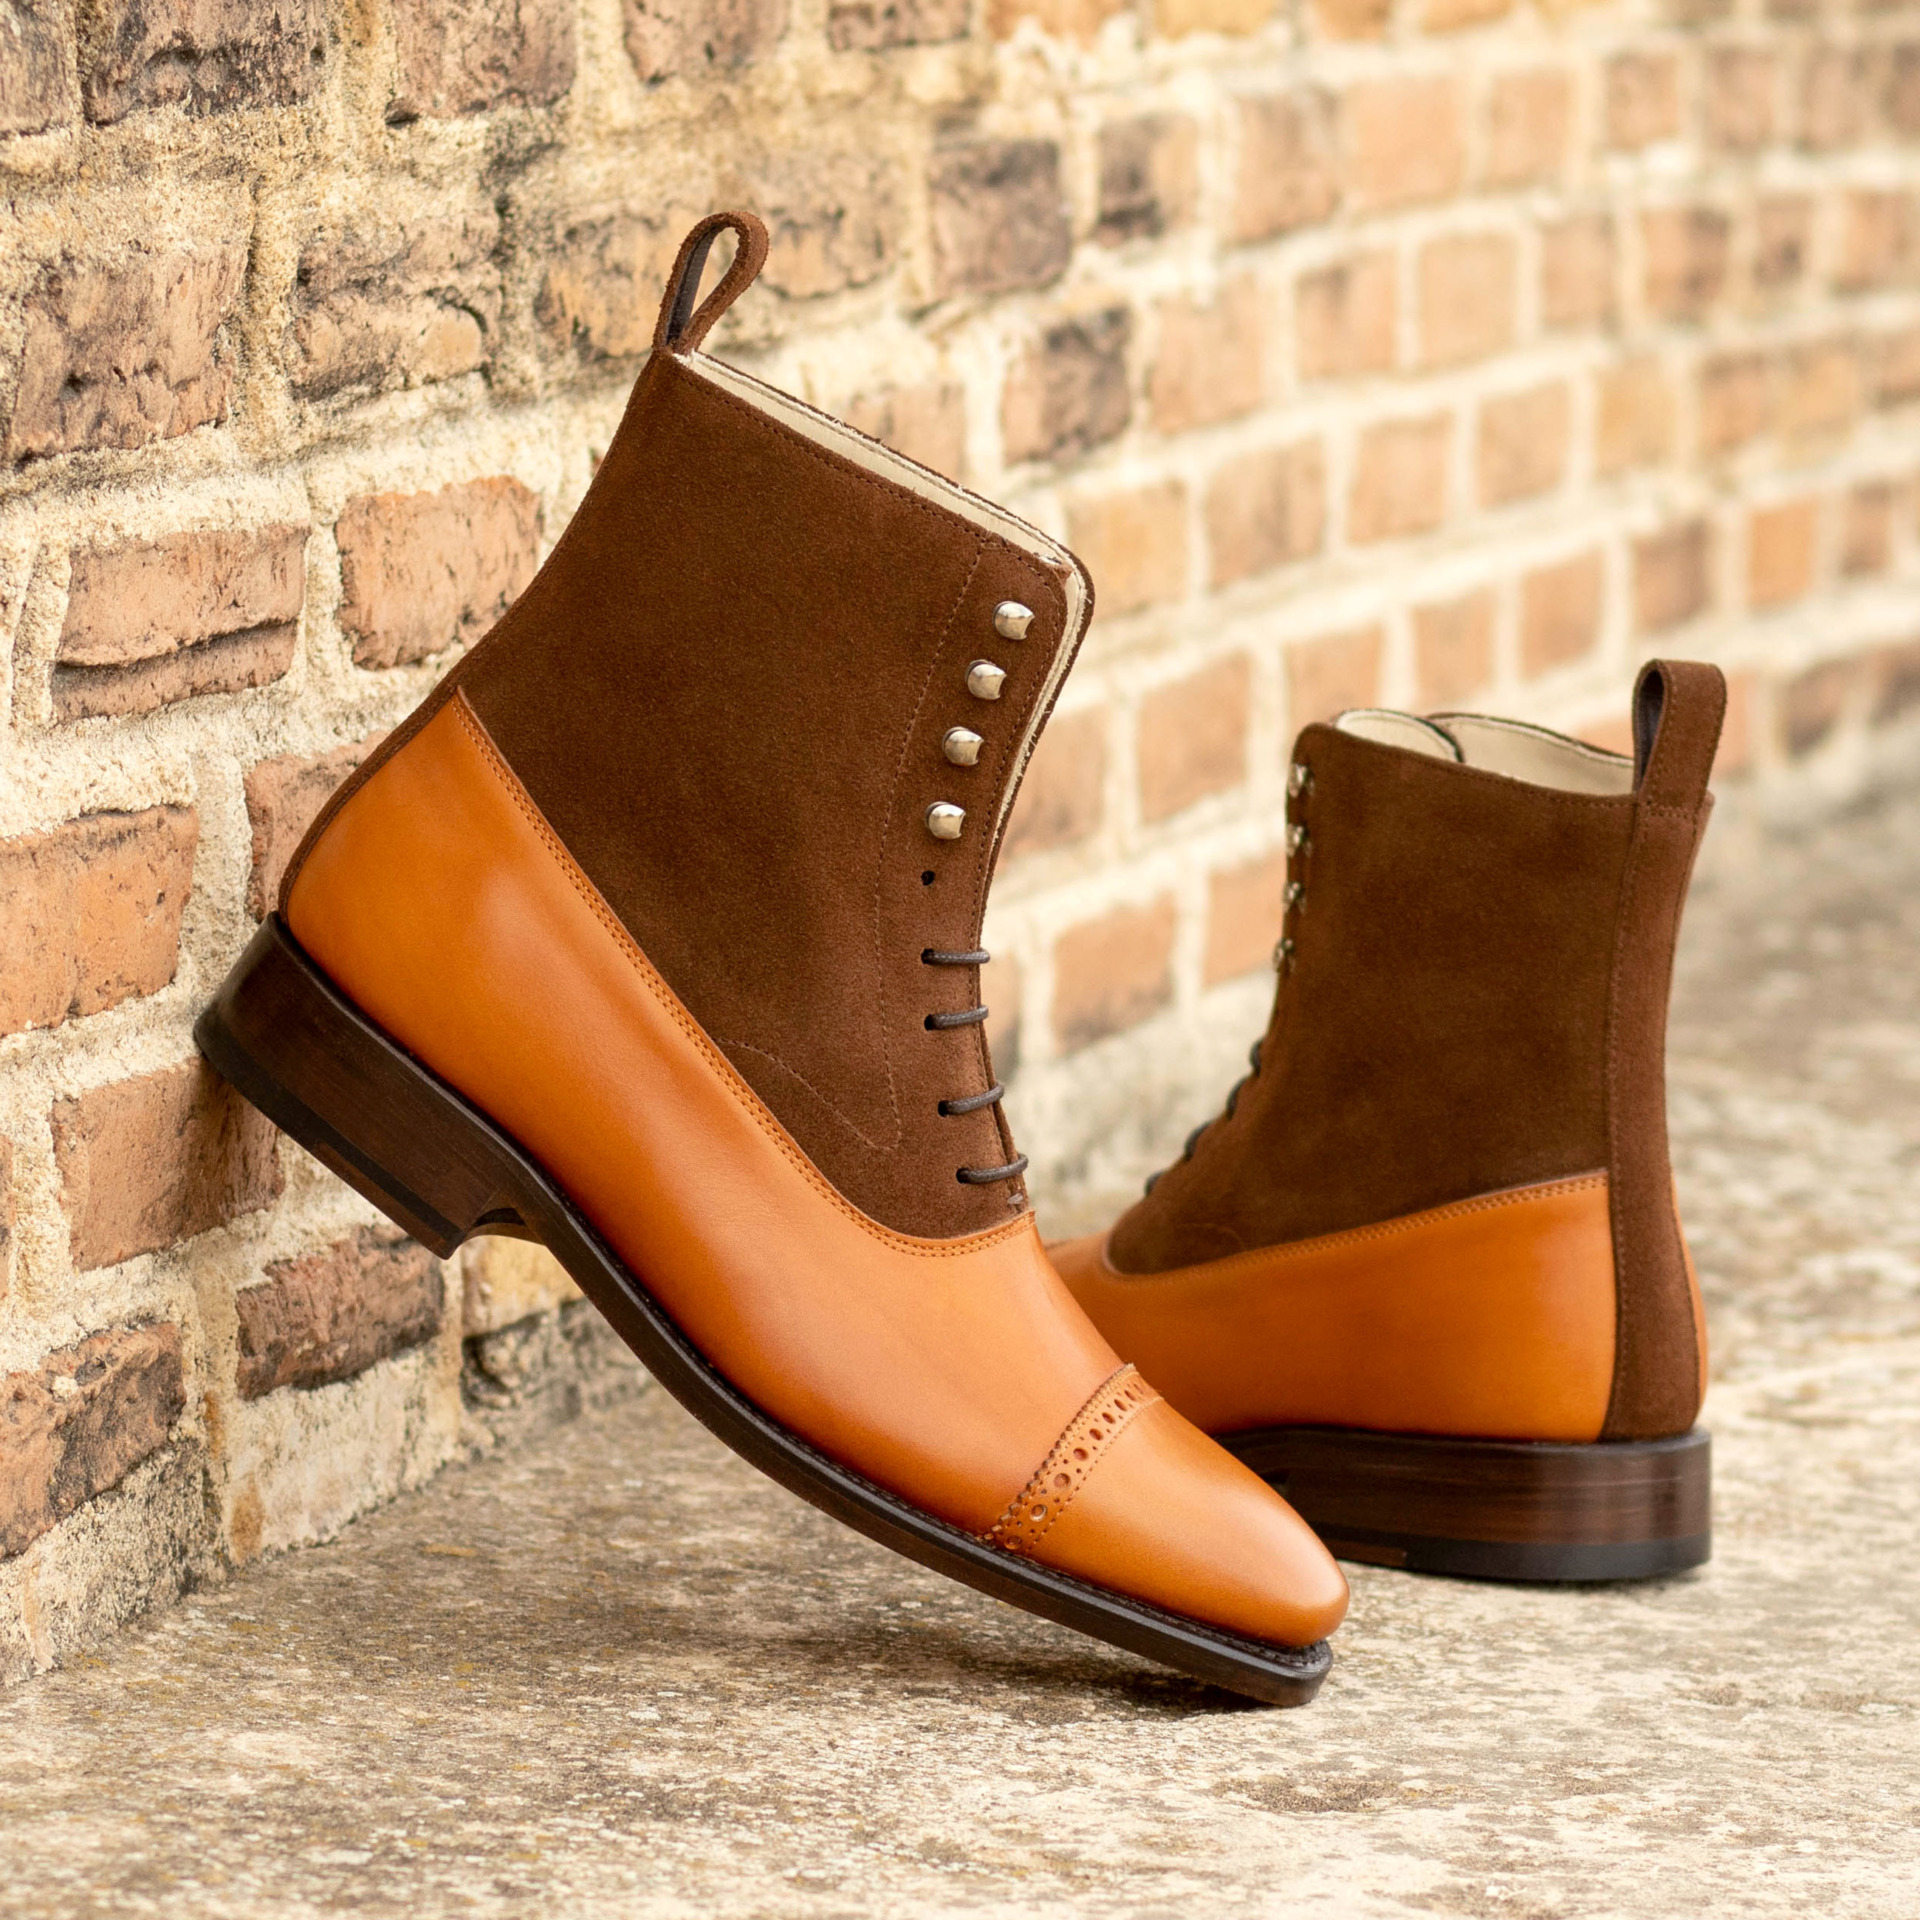 Introducing The Kinzie St. Balmoral Boot No. 8201: A Fusion of Elegance and Craftsmanship